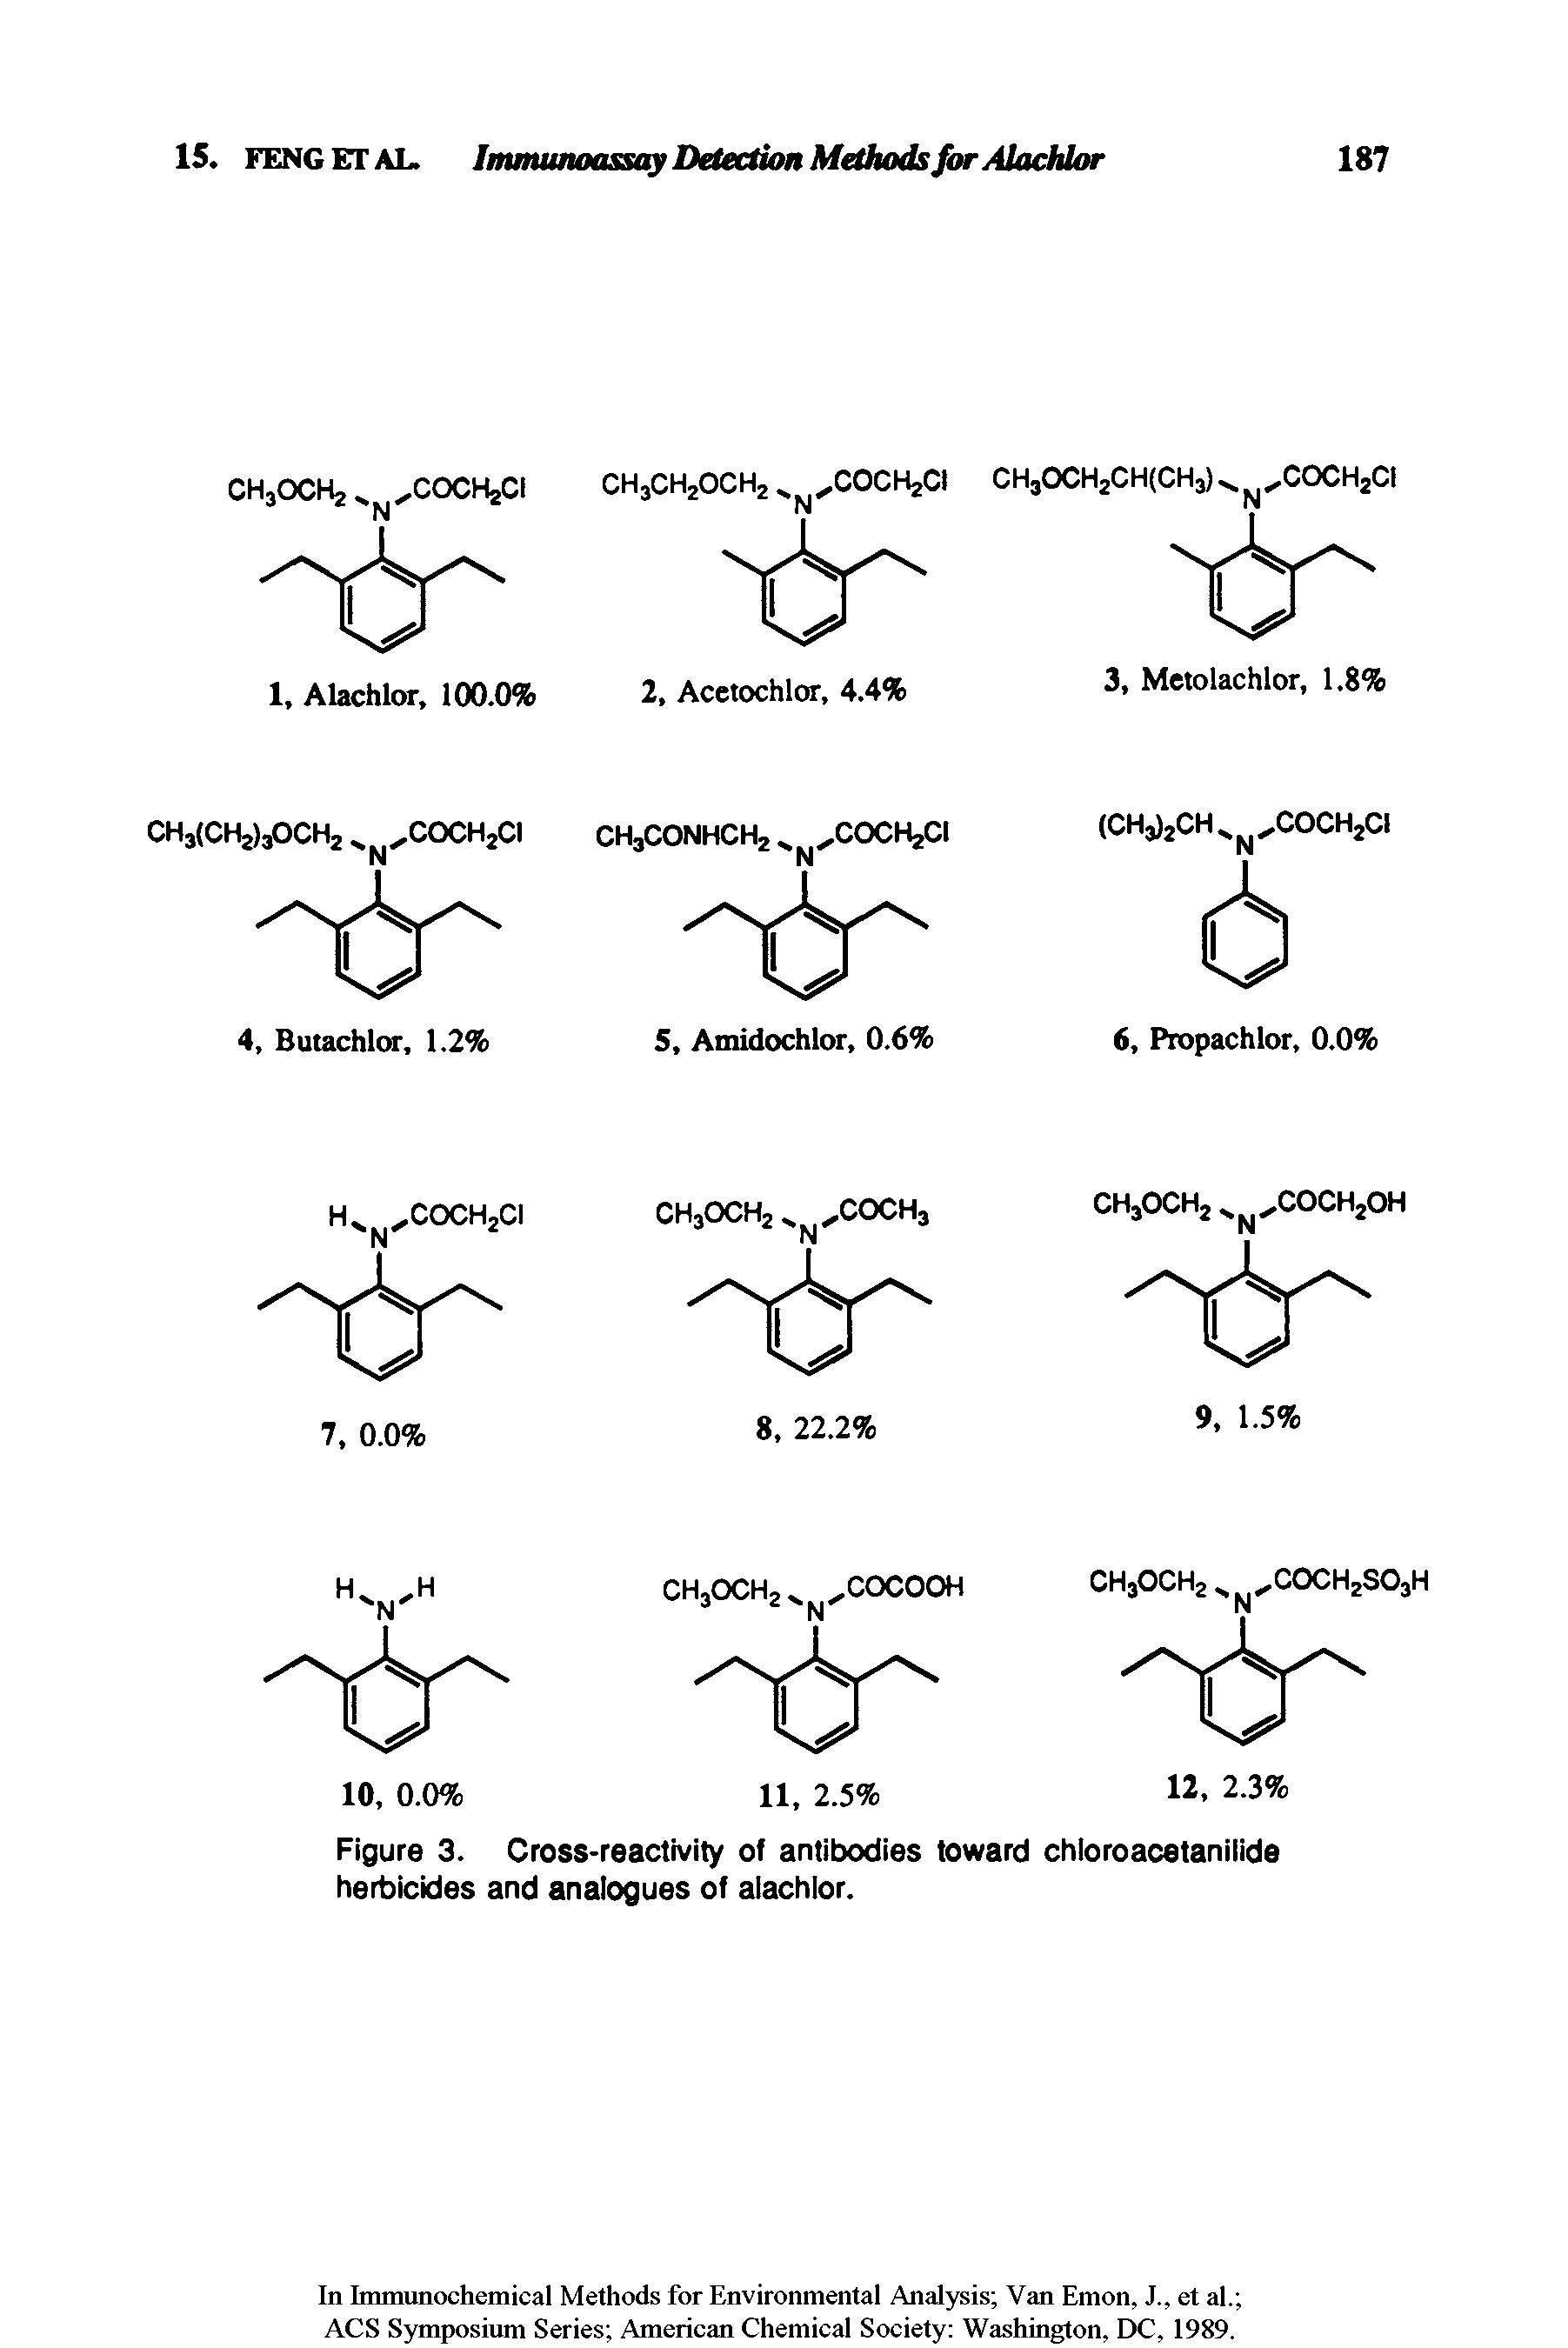 Figure 3. Cross-reactivity of antibodies toward chloroacetanilide herbicides and analogues of alachlor.